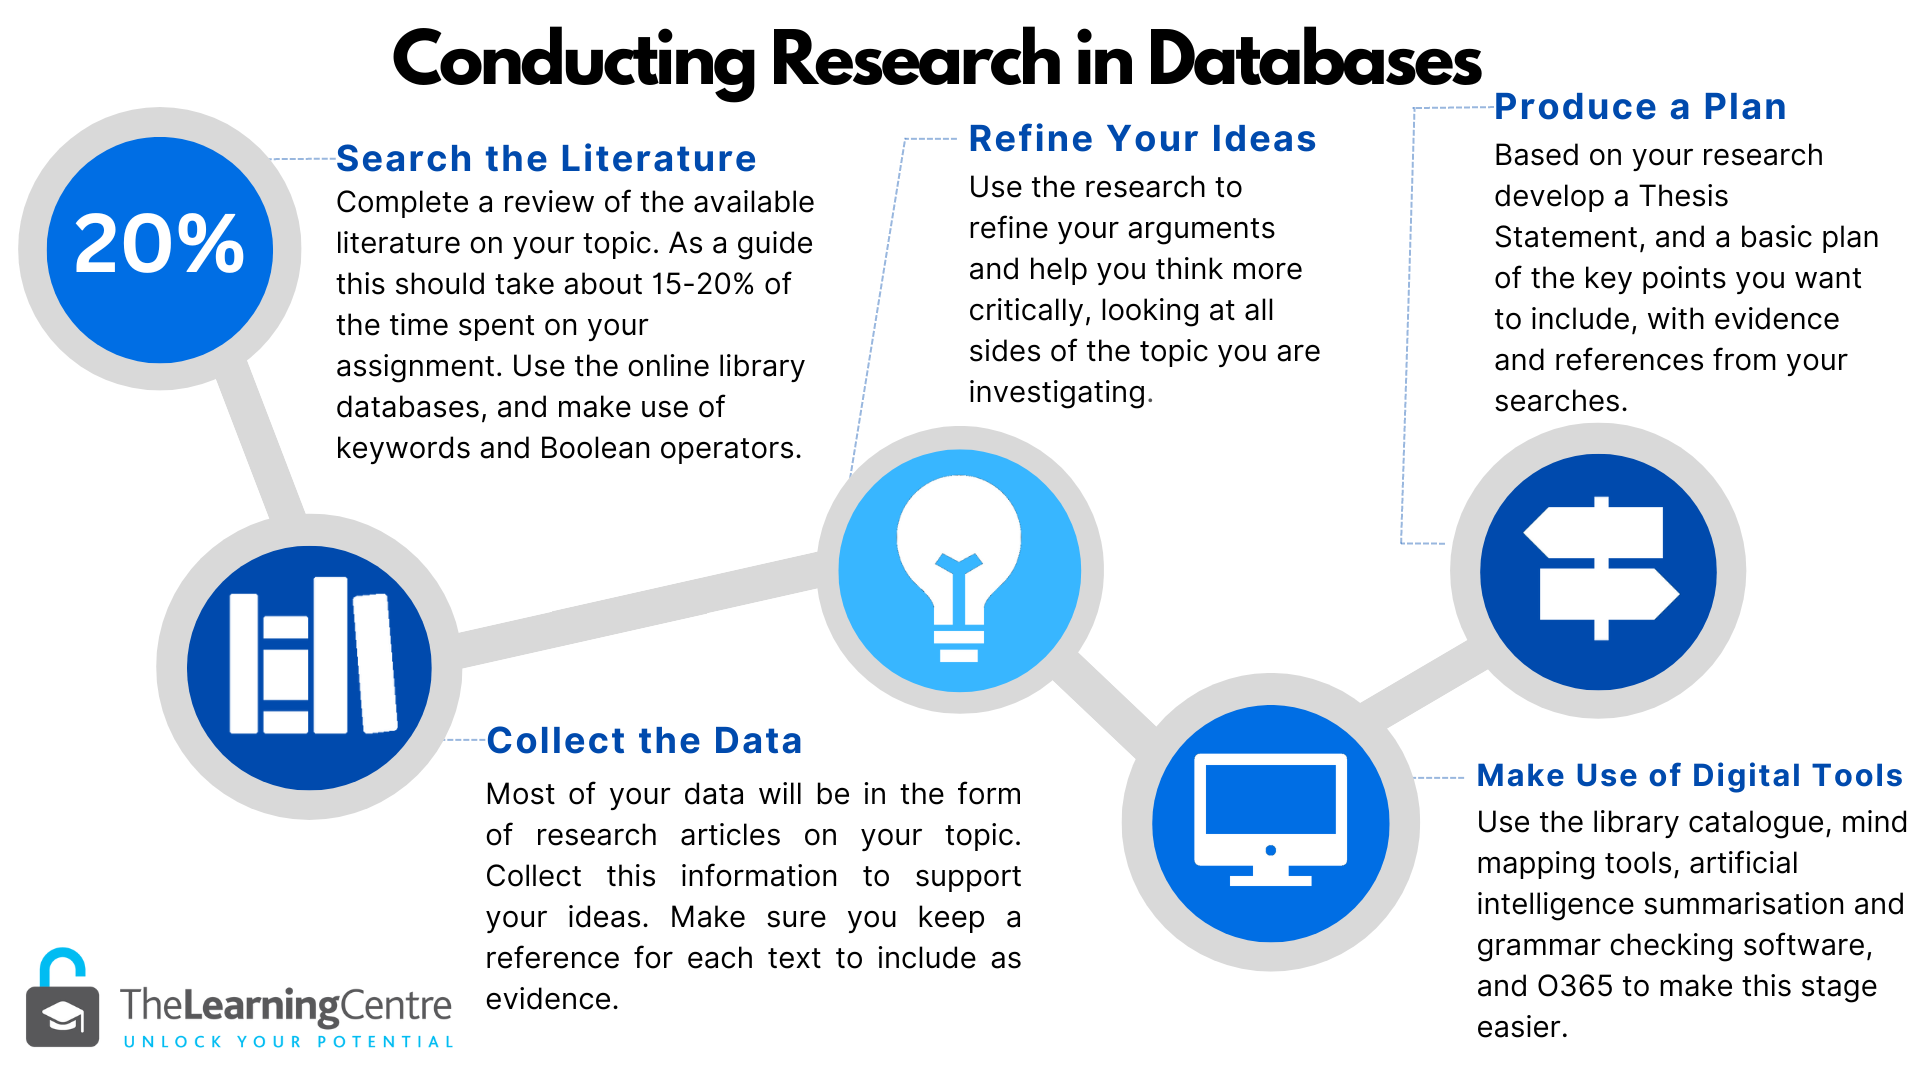 Conducting Research in Databases